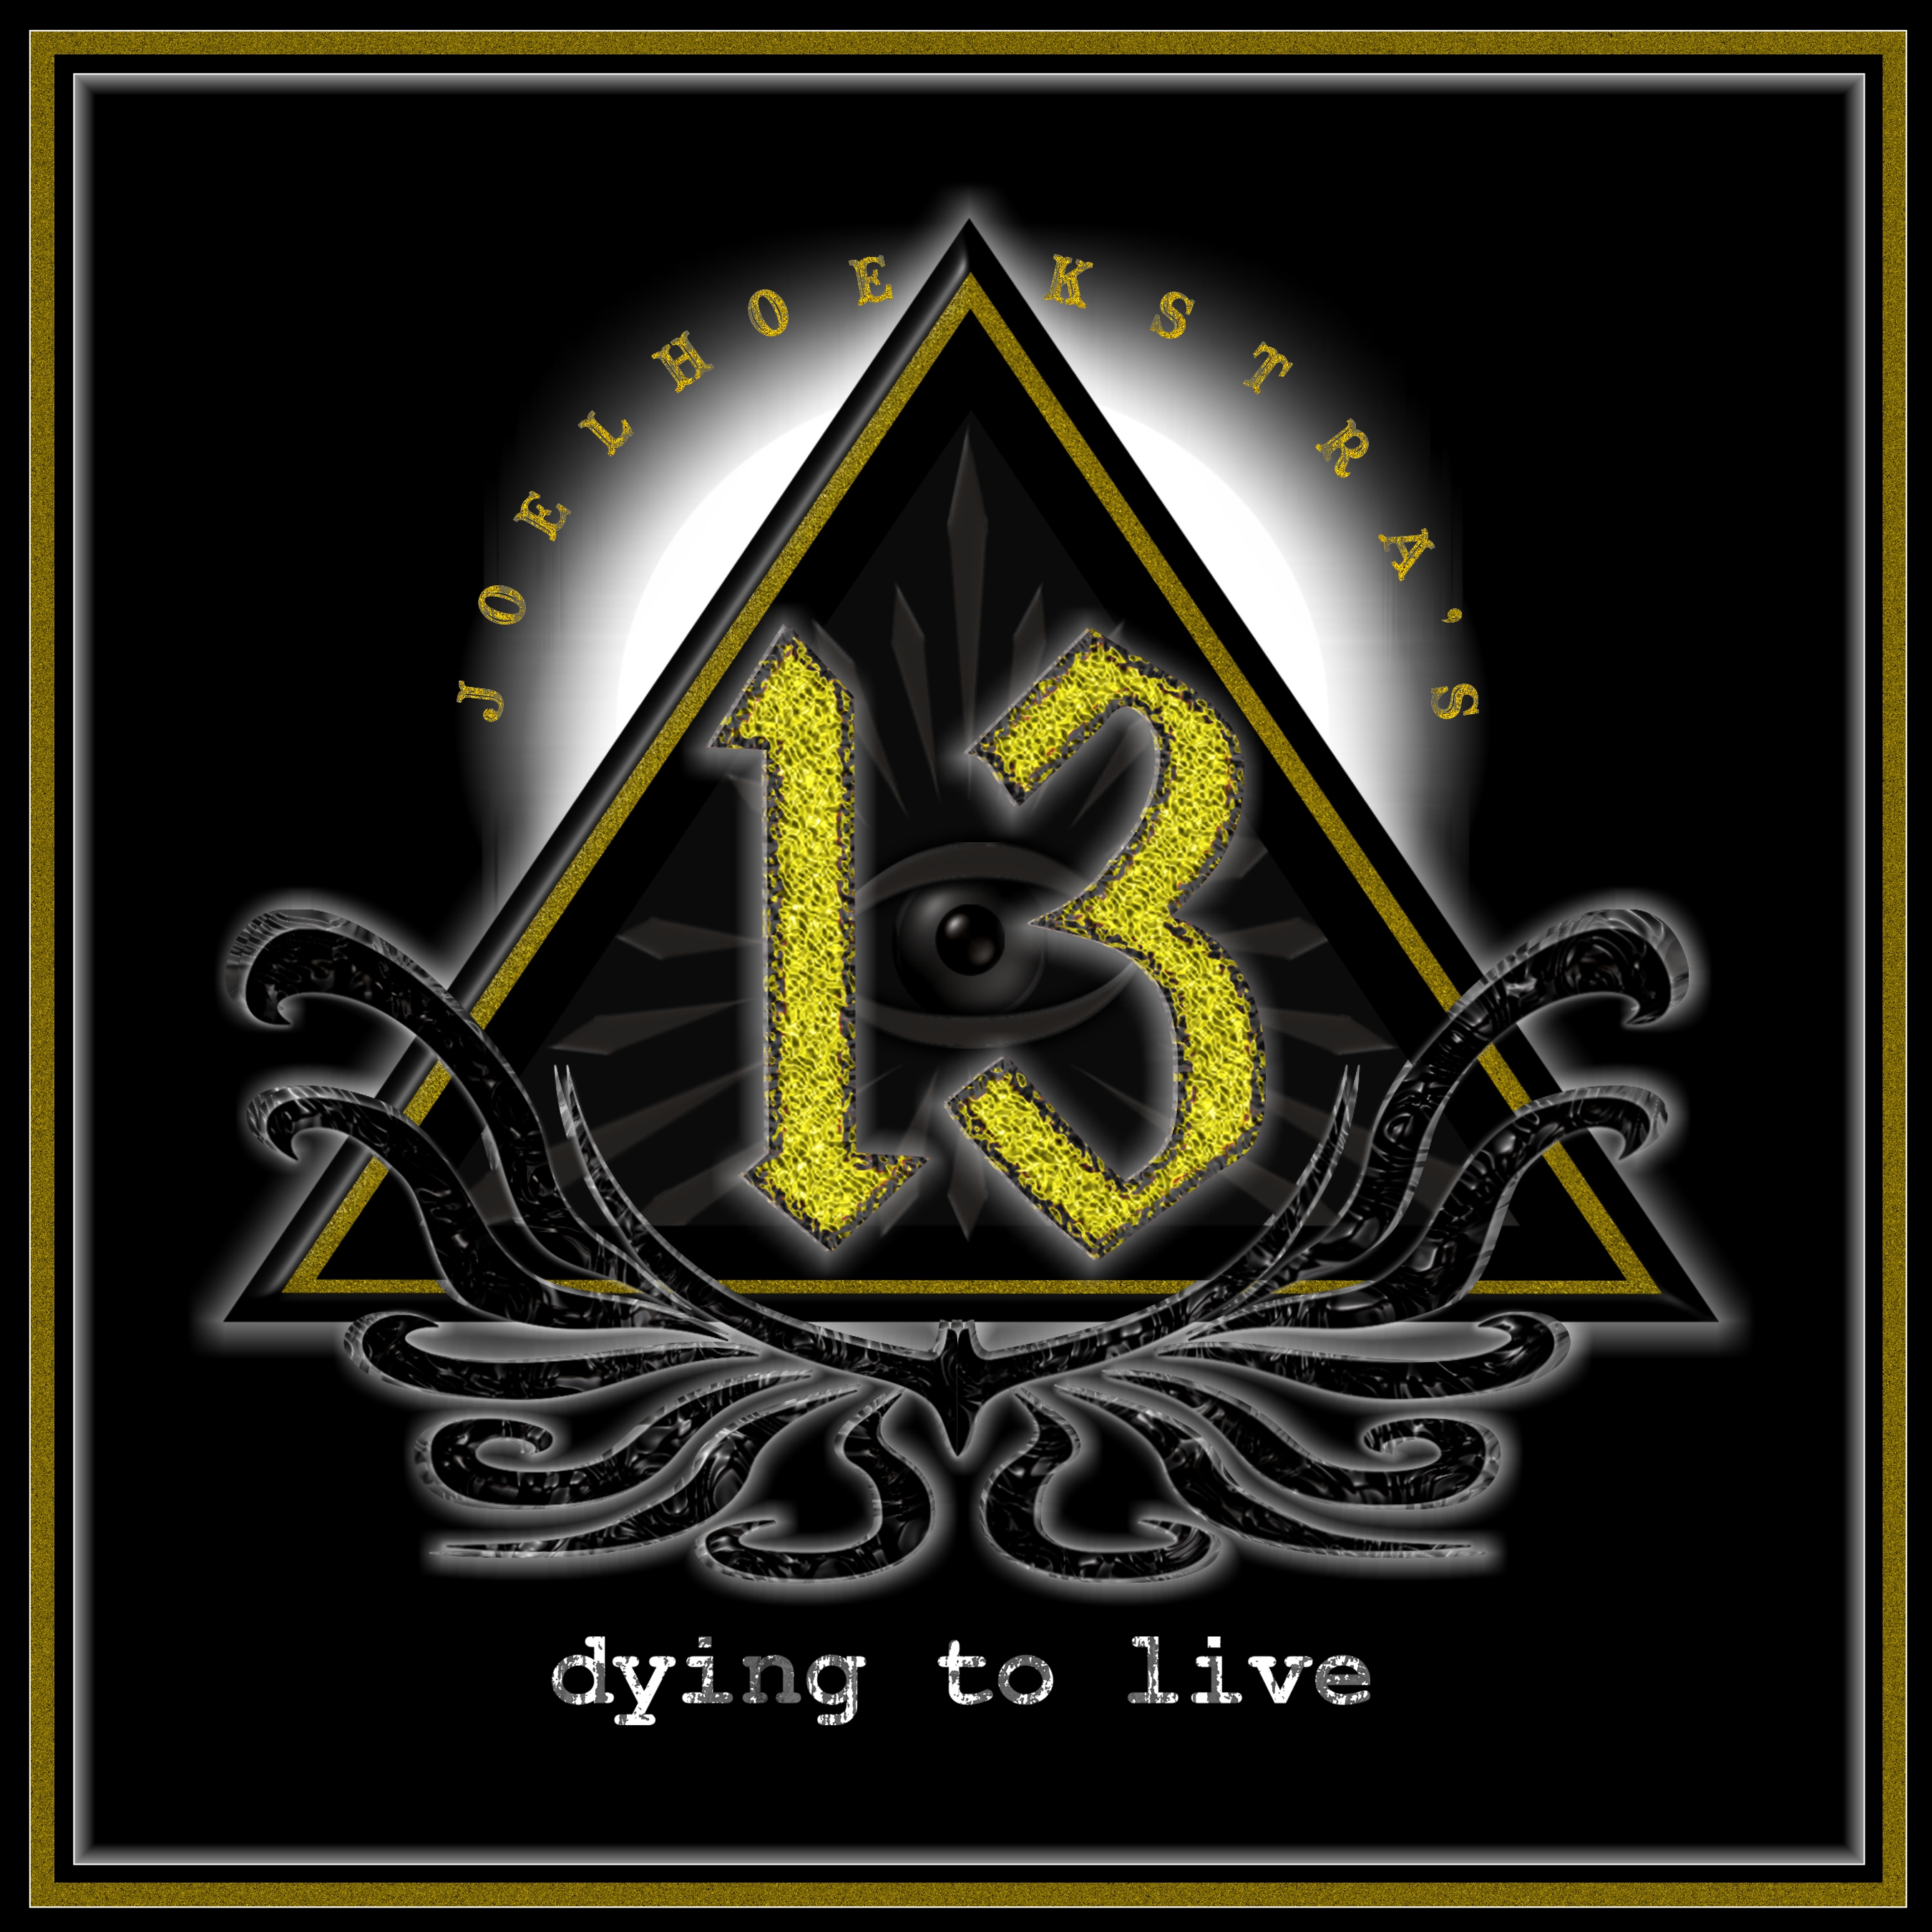 Joel Hoekstra’s 13 Dying to Live – First Album from the Guitarist’s New Musical Project!